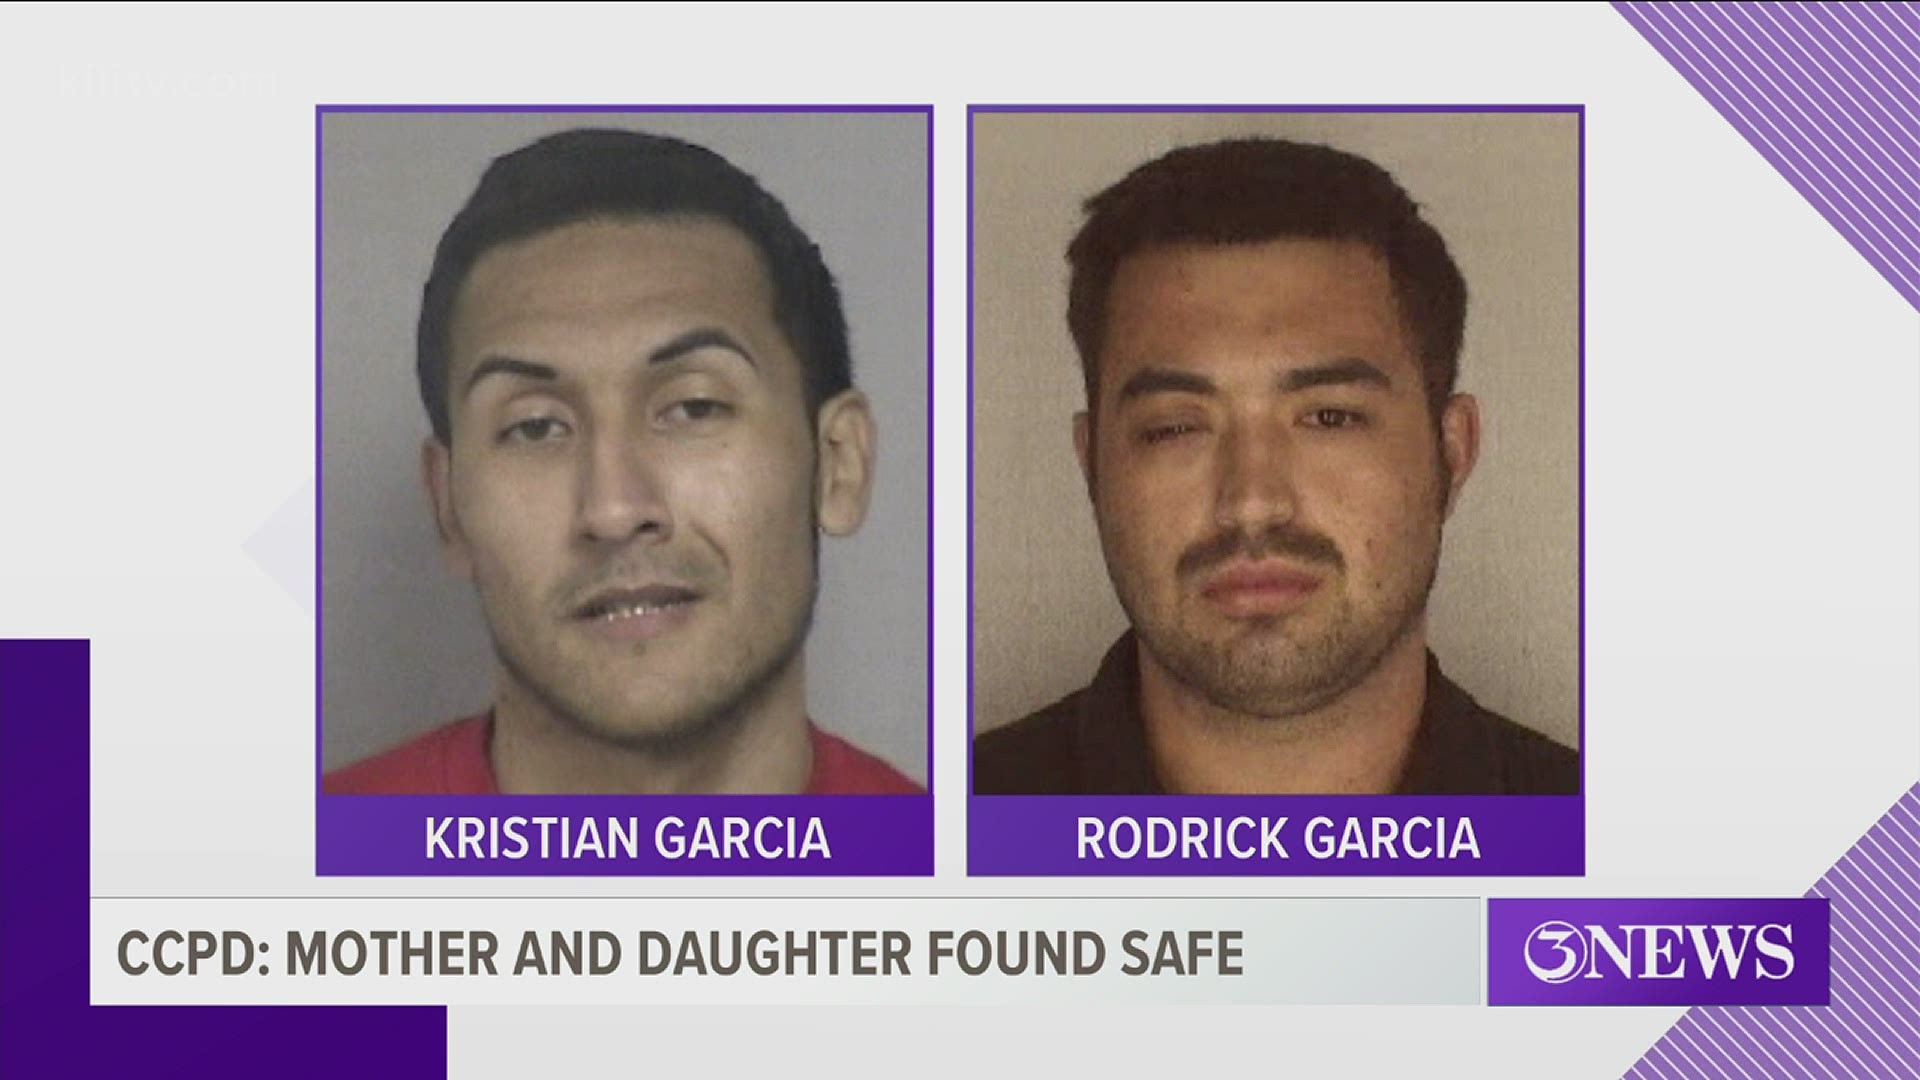 Kristian Garcia and Rodrick Garcia have been arrested for kidnapping and are in jail.